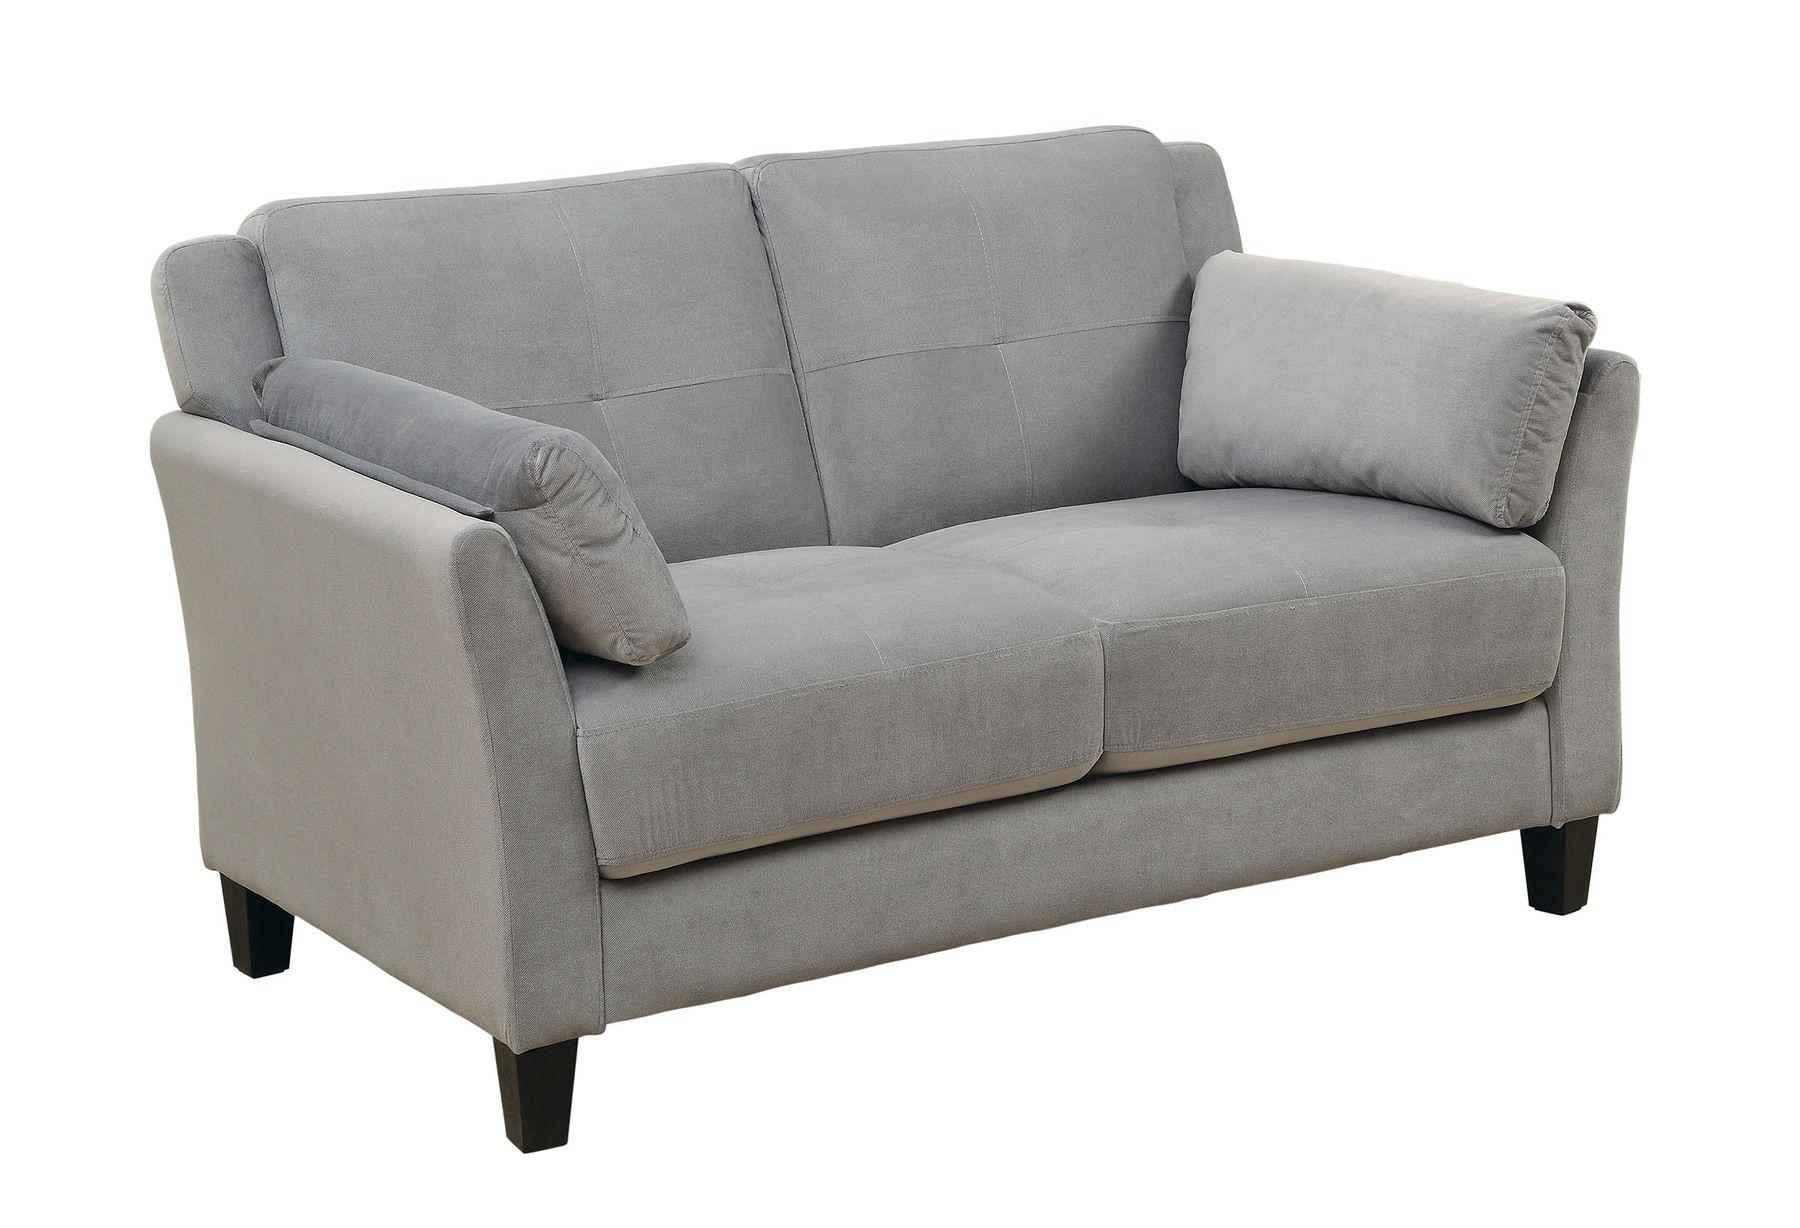 Contemporary Loveseat CM6716GY-LV Ysabel CM6716GY-LV in Warm Gray 